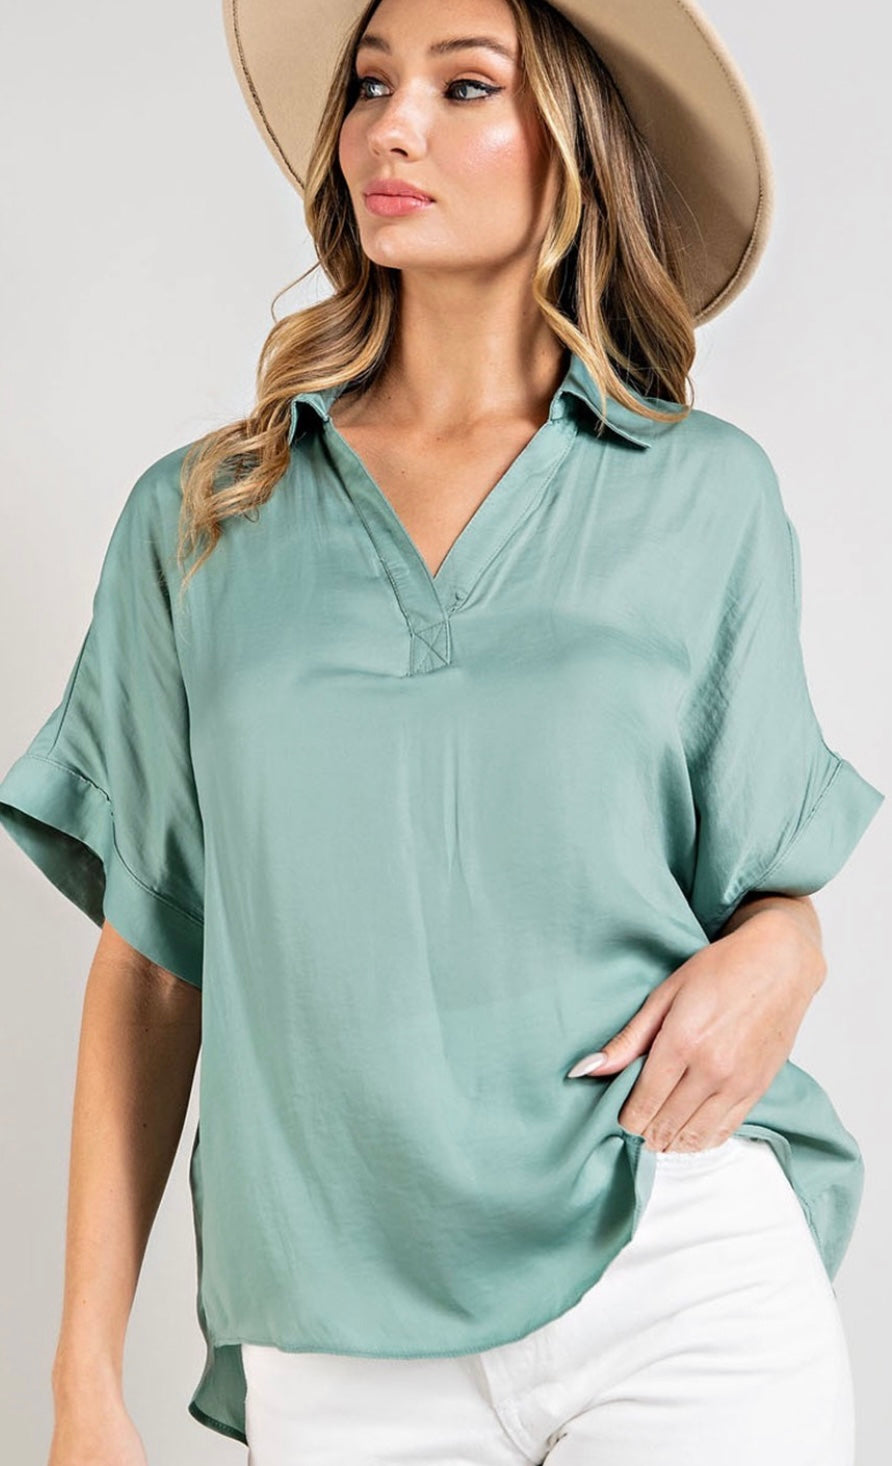 Eesome Sage Collared V Neck Short Sleeve Top